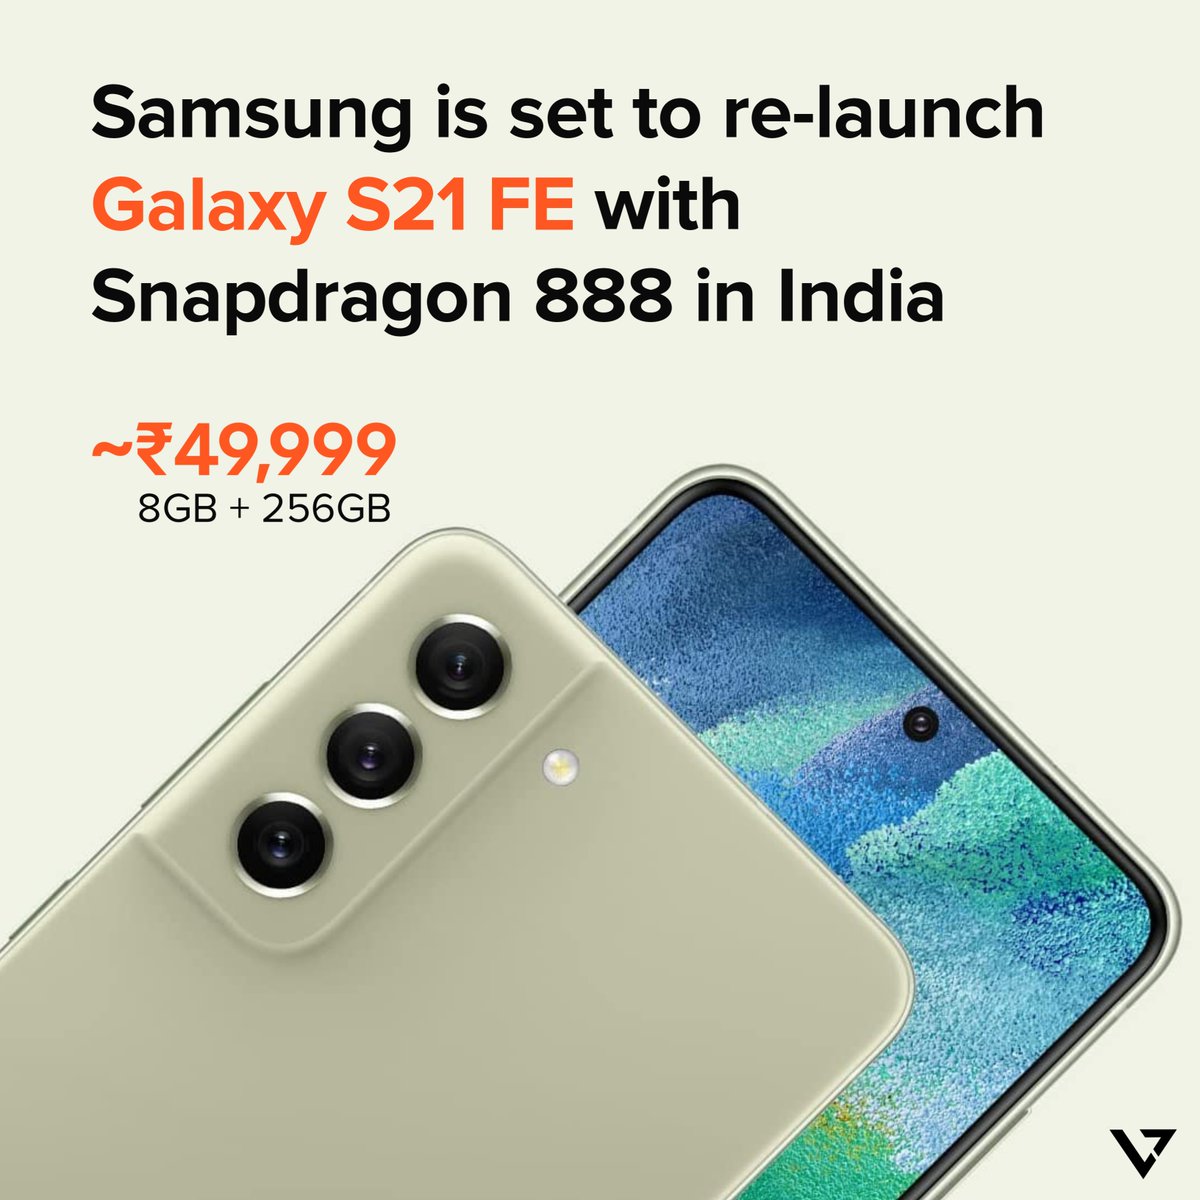 Will you buy the Samsung Galaxy S21 FE with Snapdragon 888 at this price?
.
.
#techyvillage #samsung #samsunggalaxys21fe #galaxys23fe #galaxyunpacked #samsunggalaxys23fe #galaxys21fe #galaxyzfold5 #galaxyzflip5 #samsunggalaxy